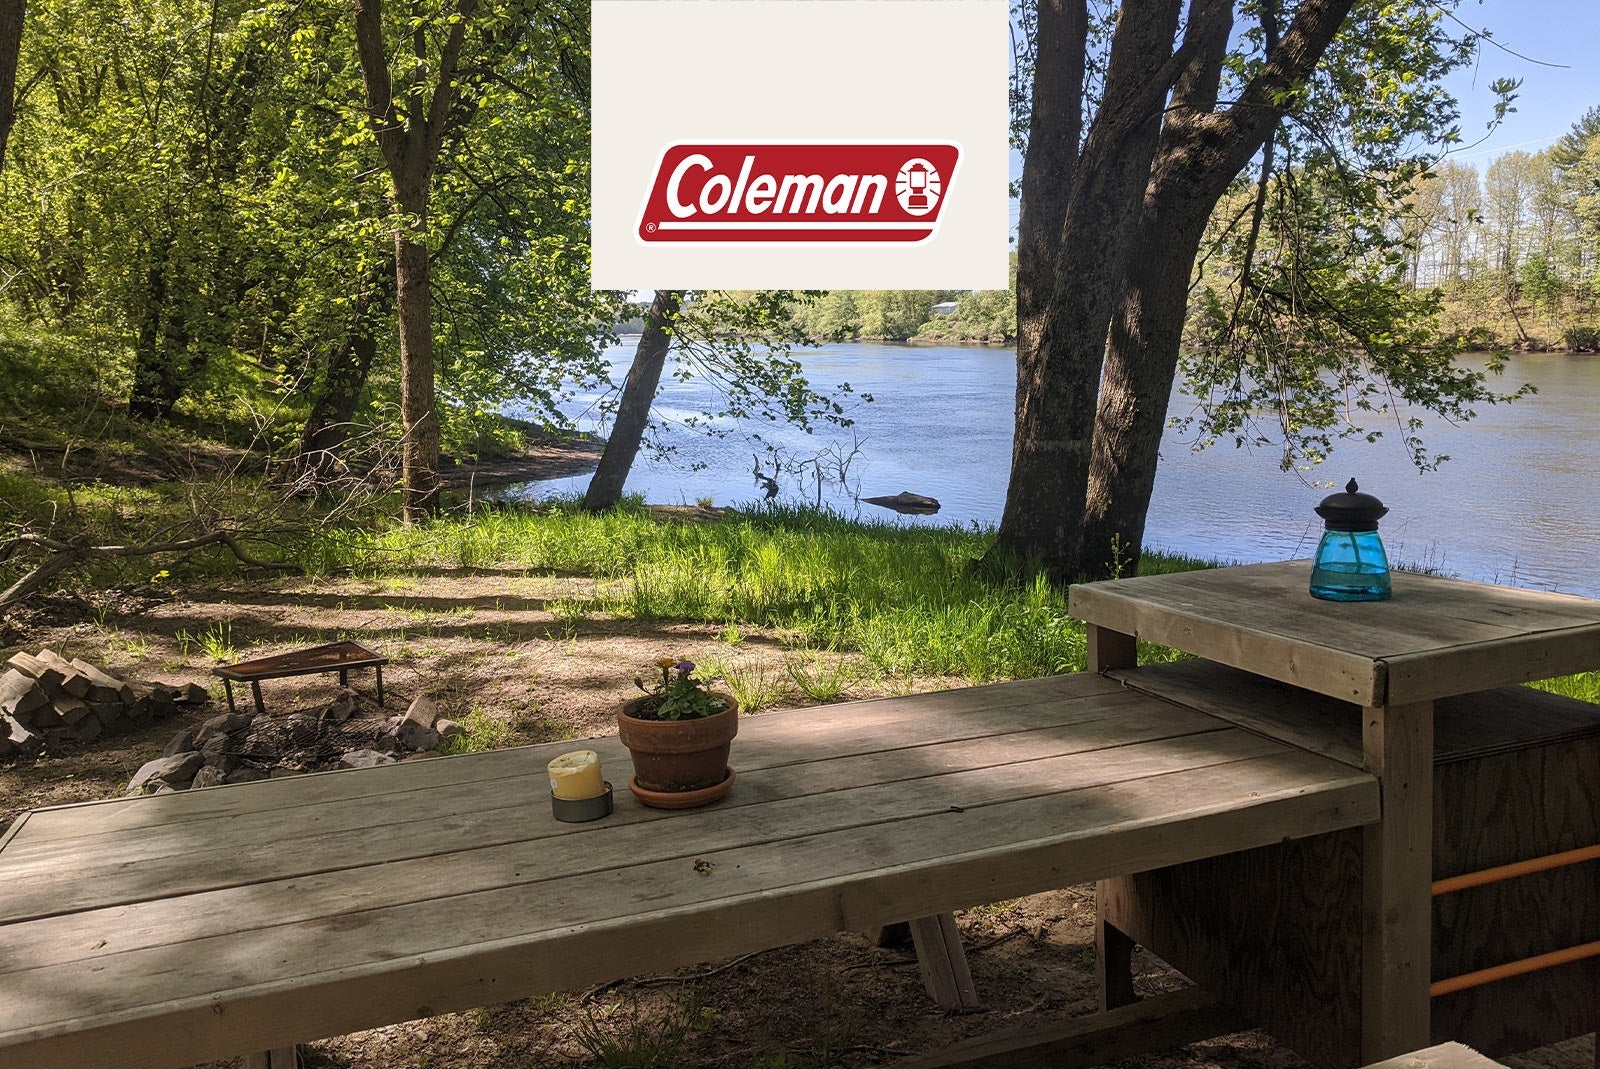 Camper submitted image from Tentrr Signature Site - Normanton Farms - Coleman Outfitted Site - 1